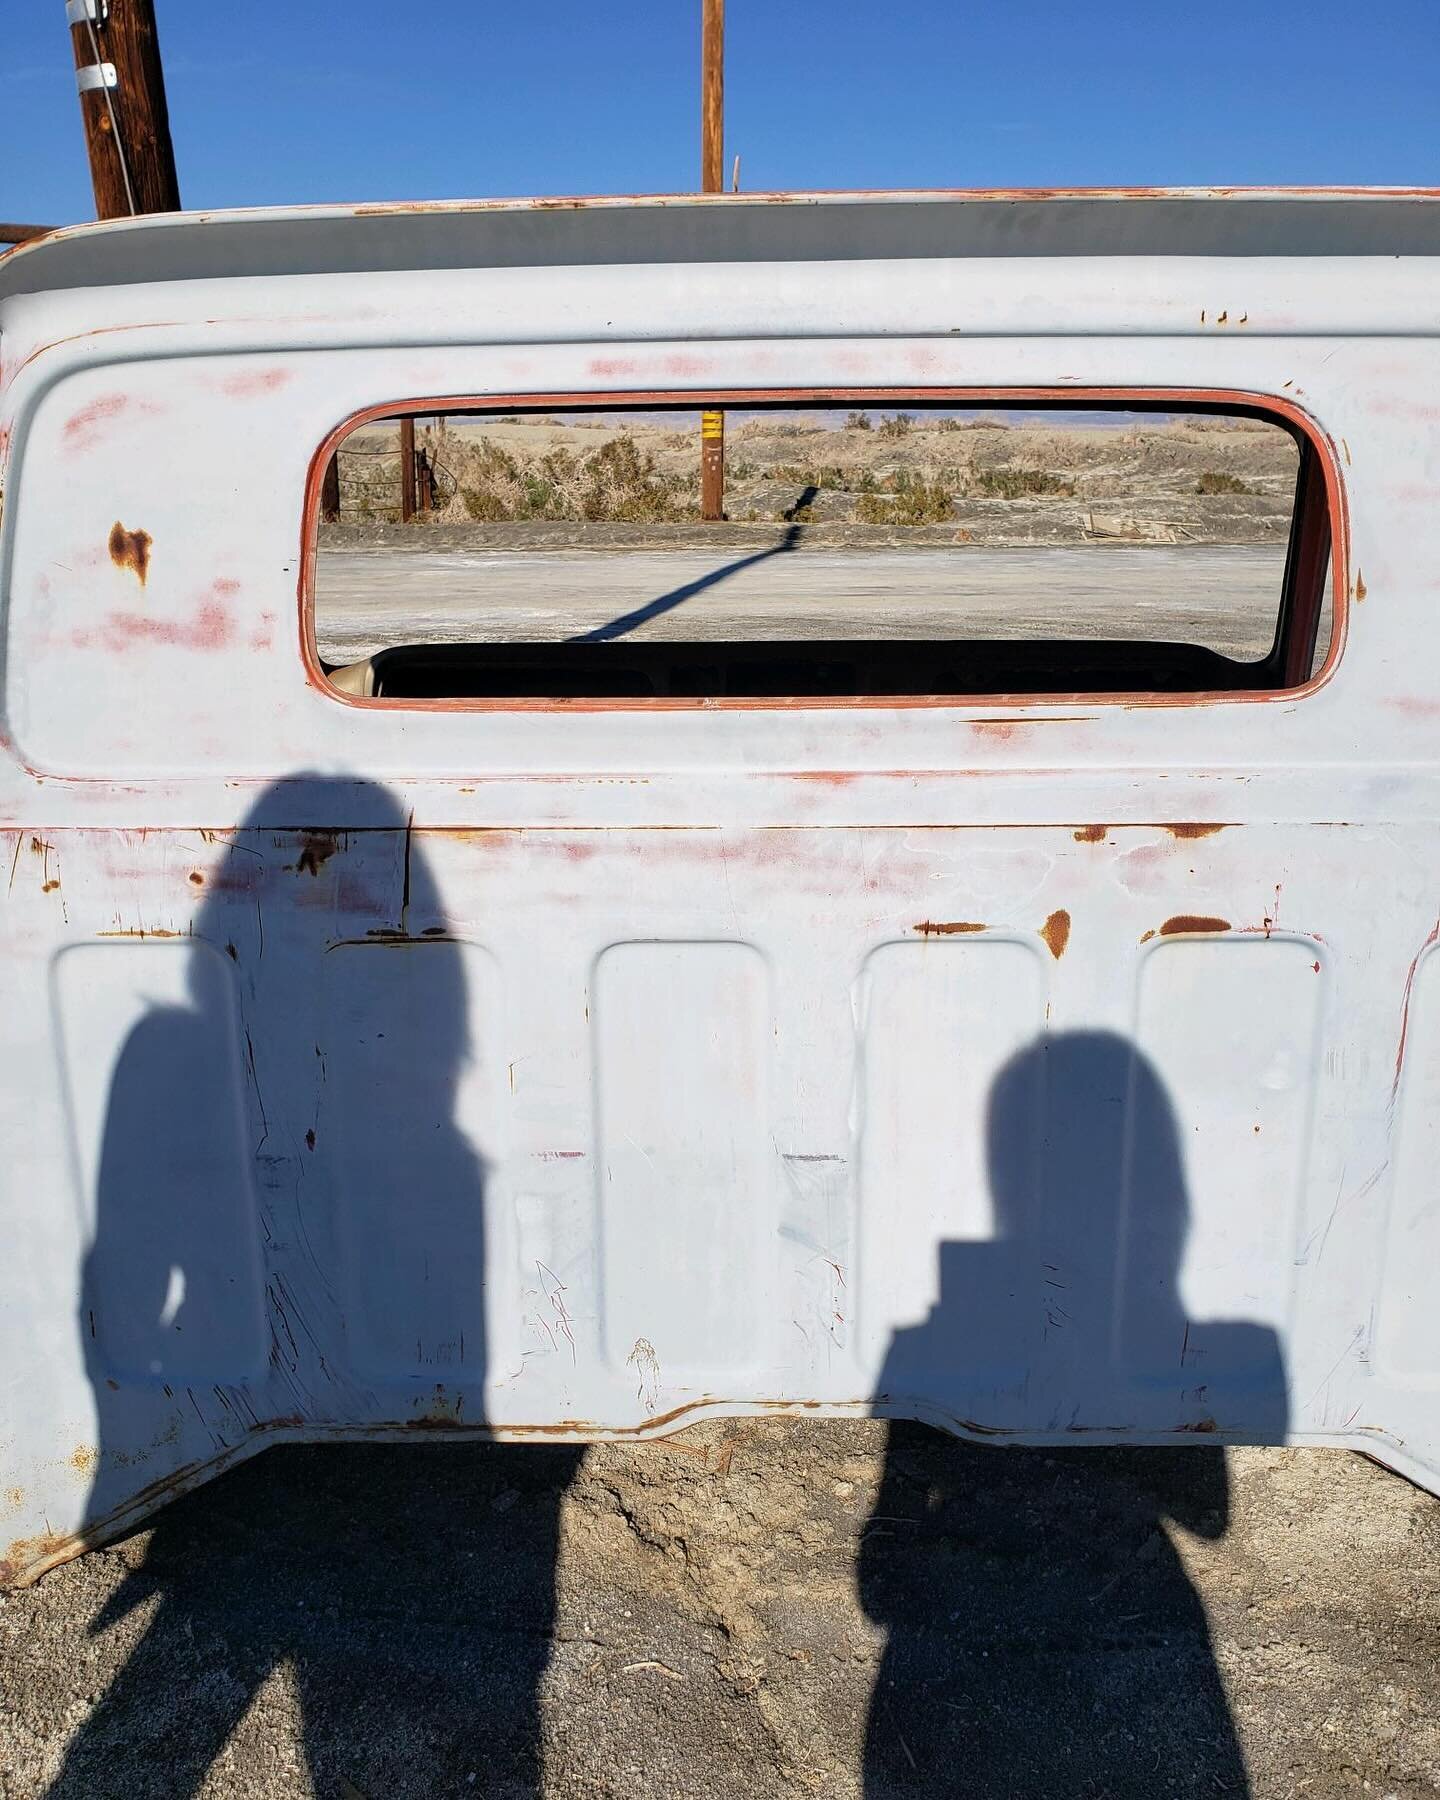 Flash back to a road trip experience with my wanderlust buddy who loves peeling paint as much as I do. @barbskoog 

#exploretocreate #wanderlust #saltonsea #roadtrip